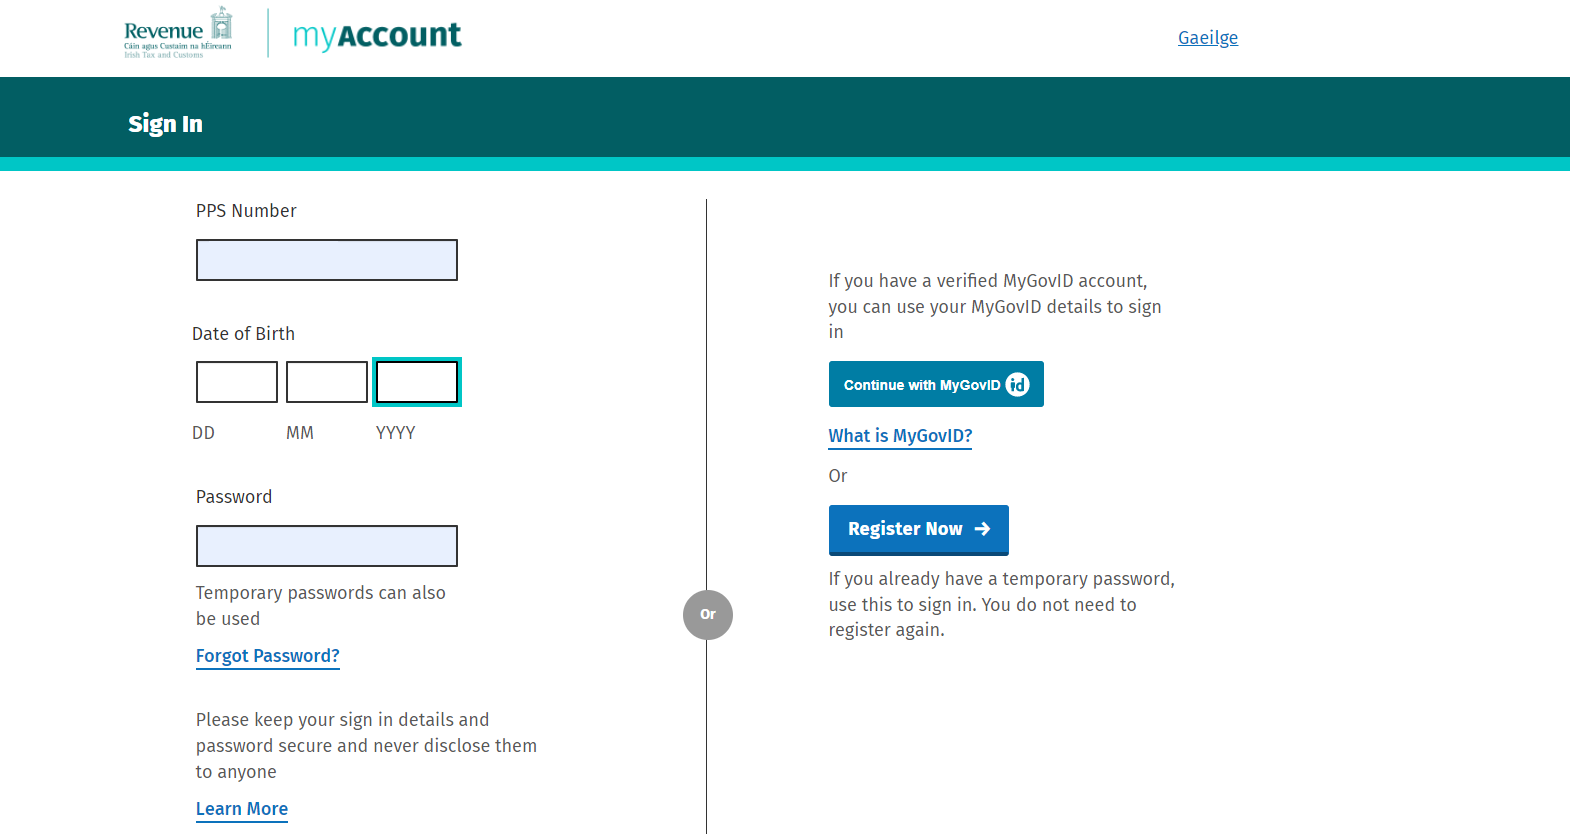 You should enter your personal profile on the Revenue website